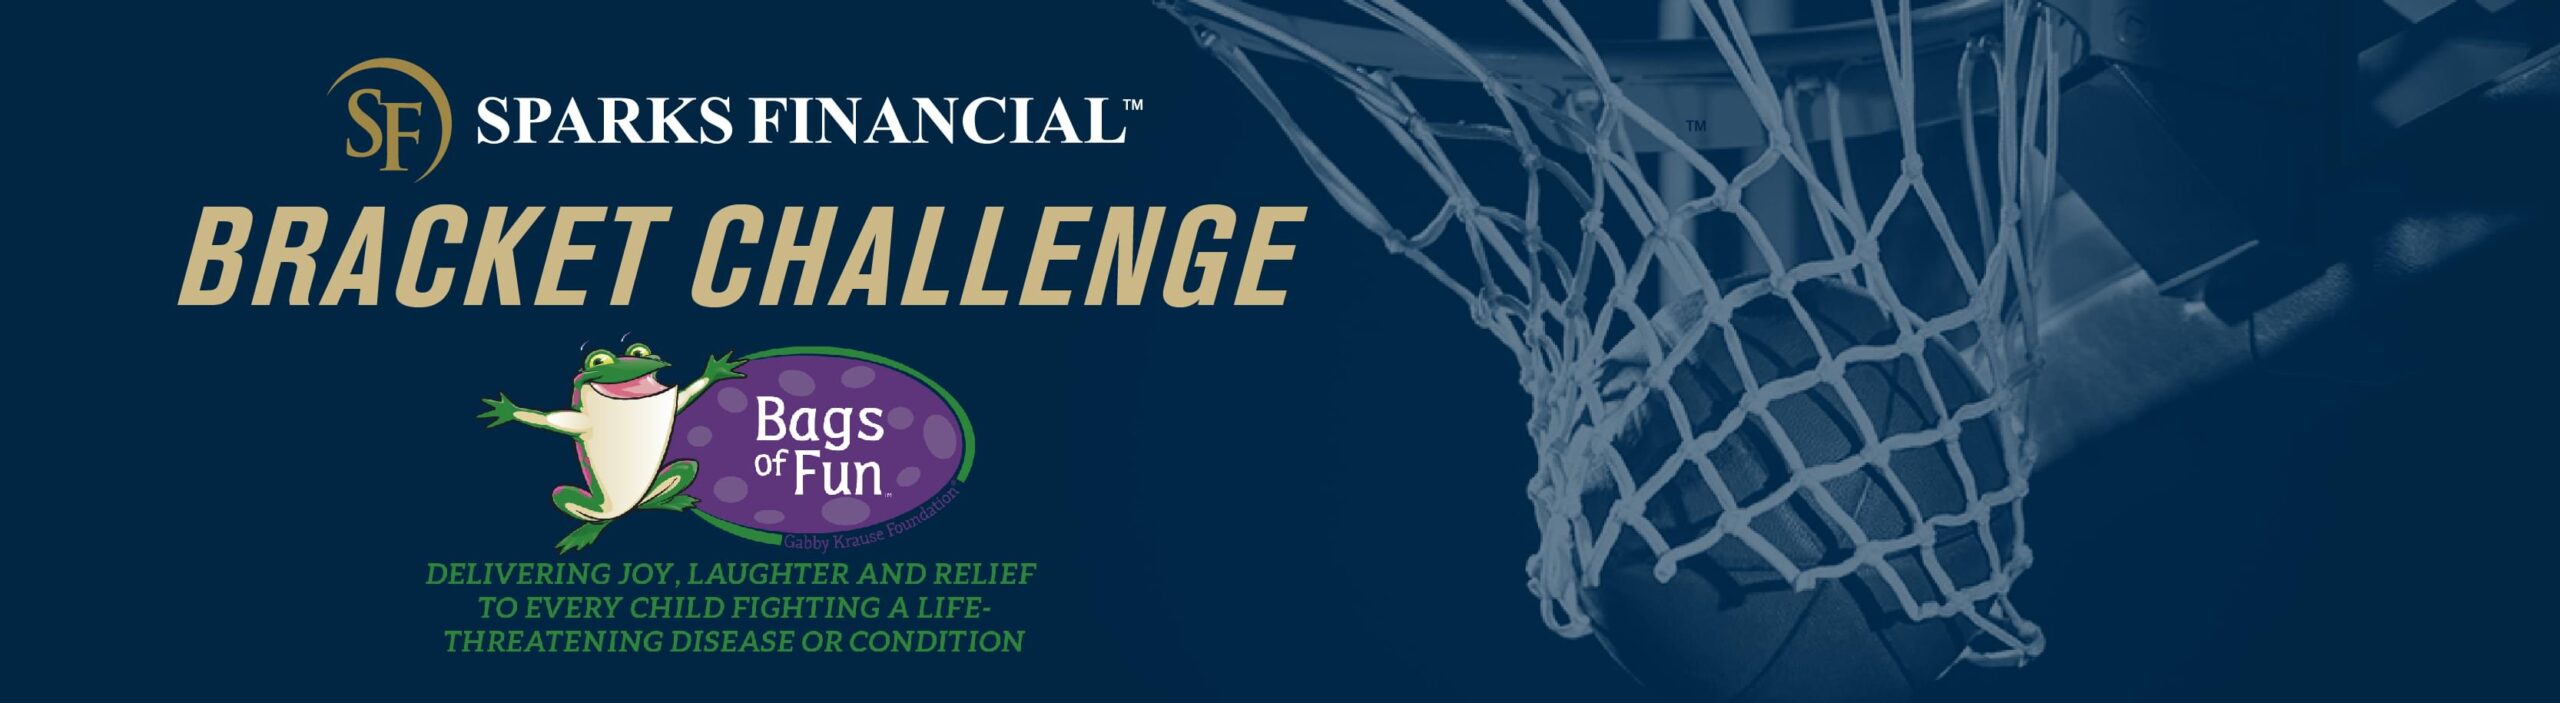 Sparks Financial Bracket Challenge Benefiting Bags of Fun - banner with Sparks Financial logo and white image of a basketball with a ball going through it. The banner is on a dark blue background and there is also the Bags of Fun logo with the phrase, Delivering Joy, Laughter, and relief to every child fighting a life-threatening disease or condition.